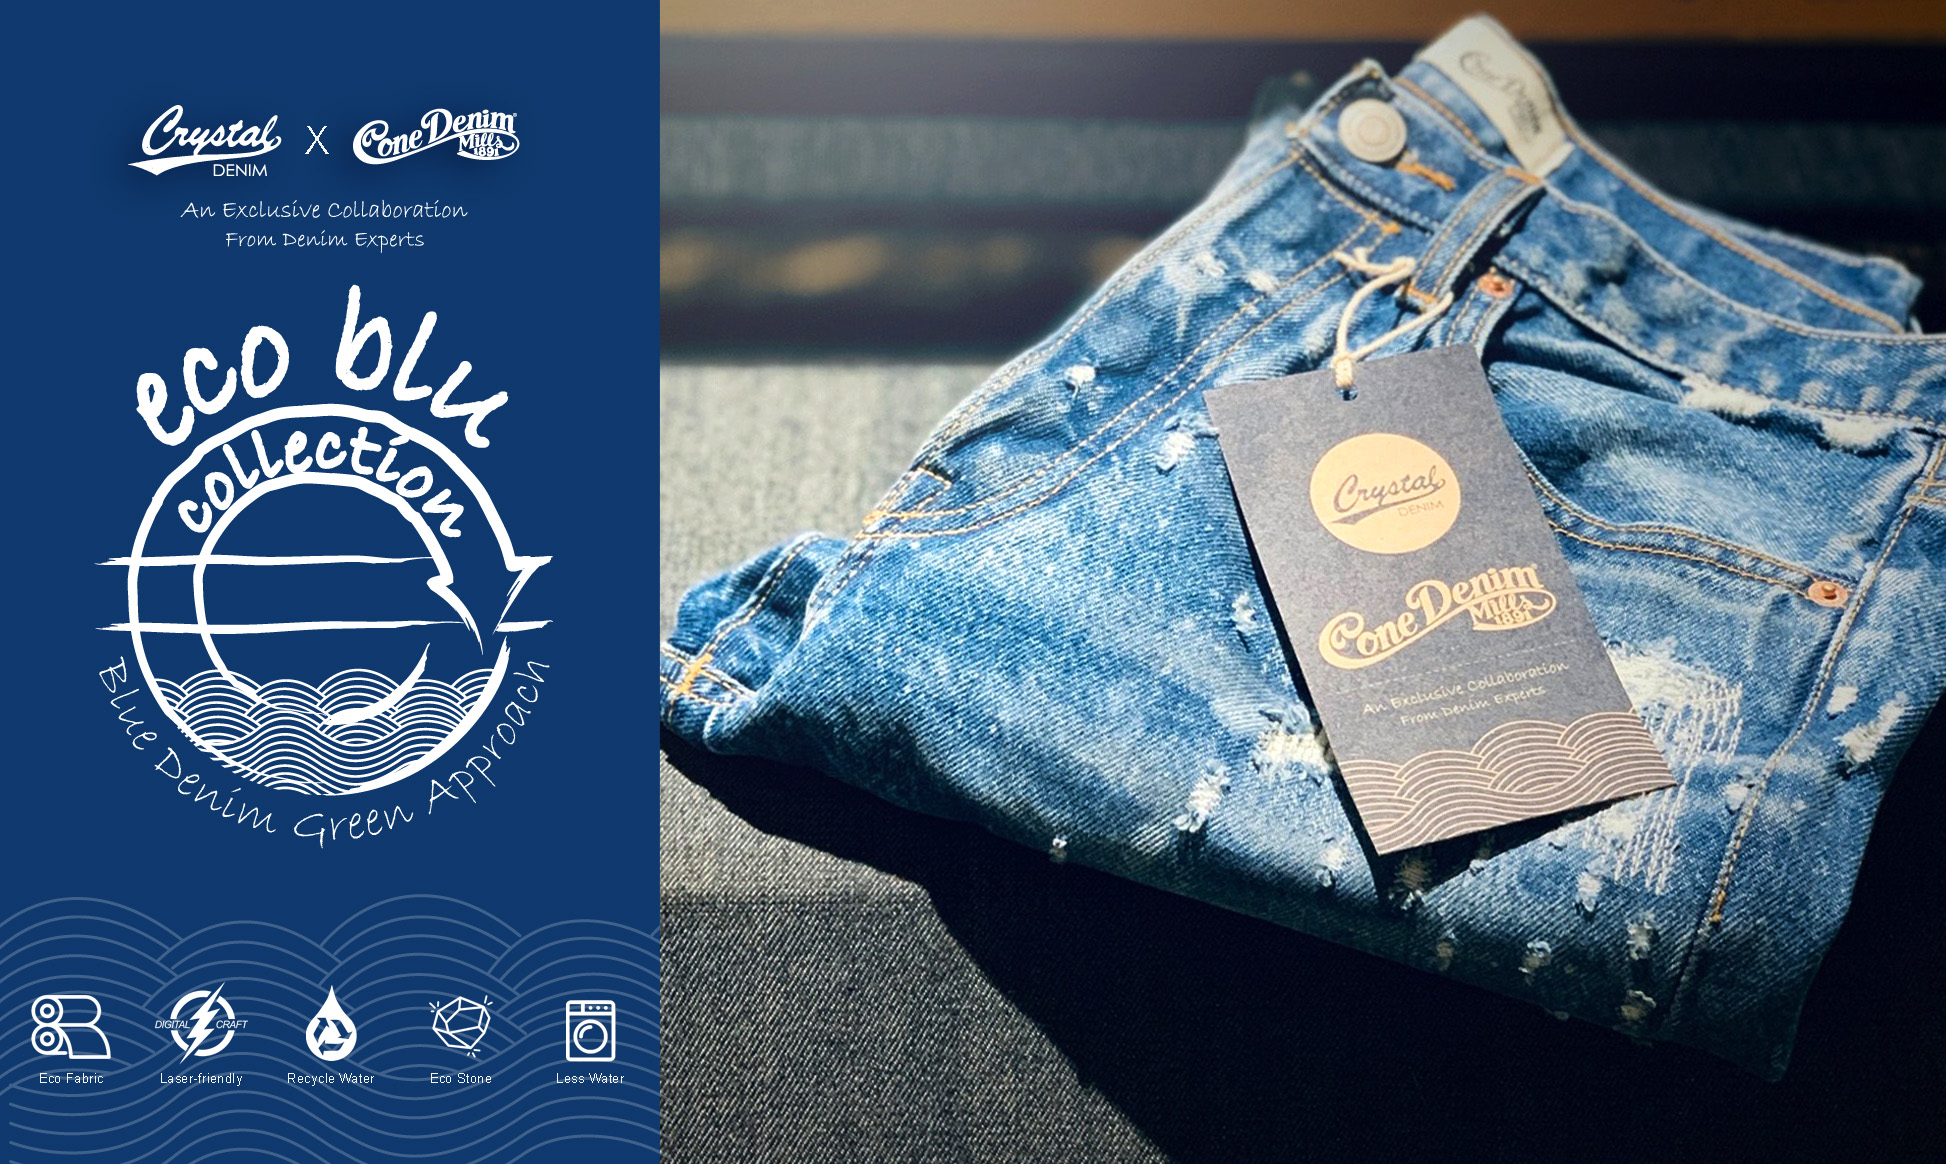 Cone Denim adopts hemp for 'sustainable' jeans